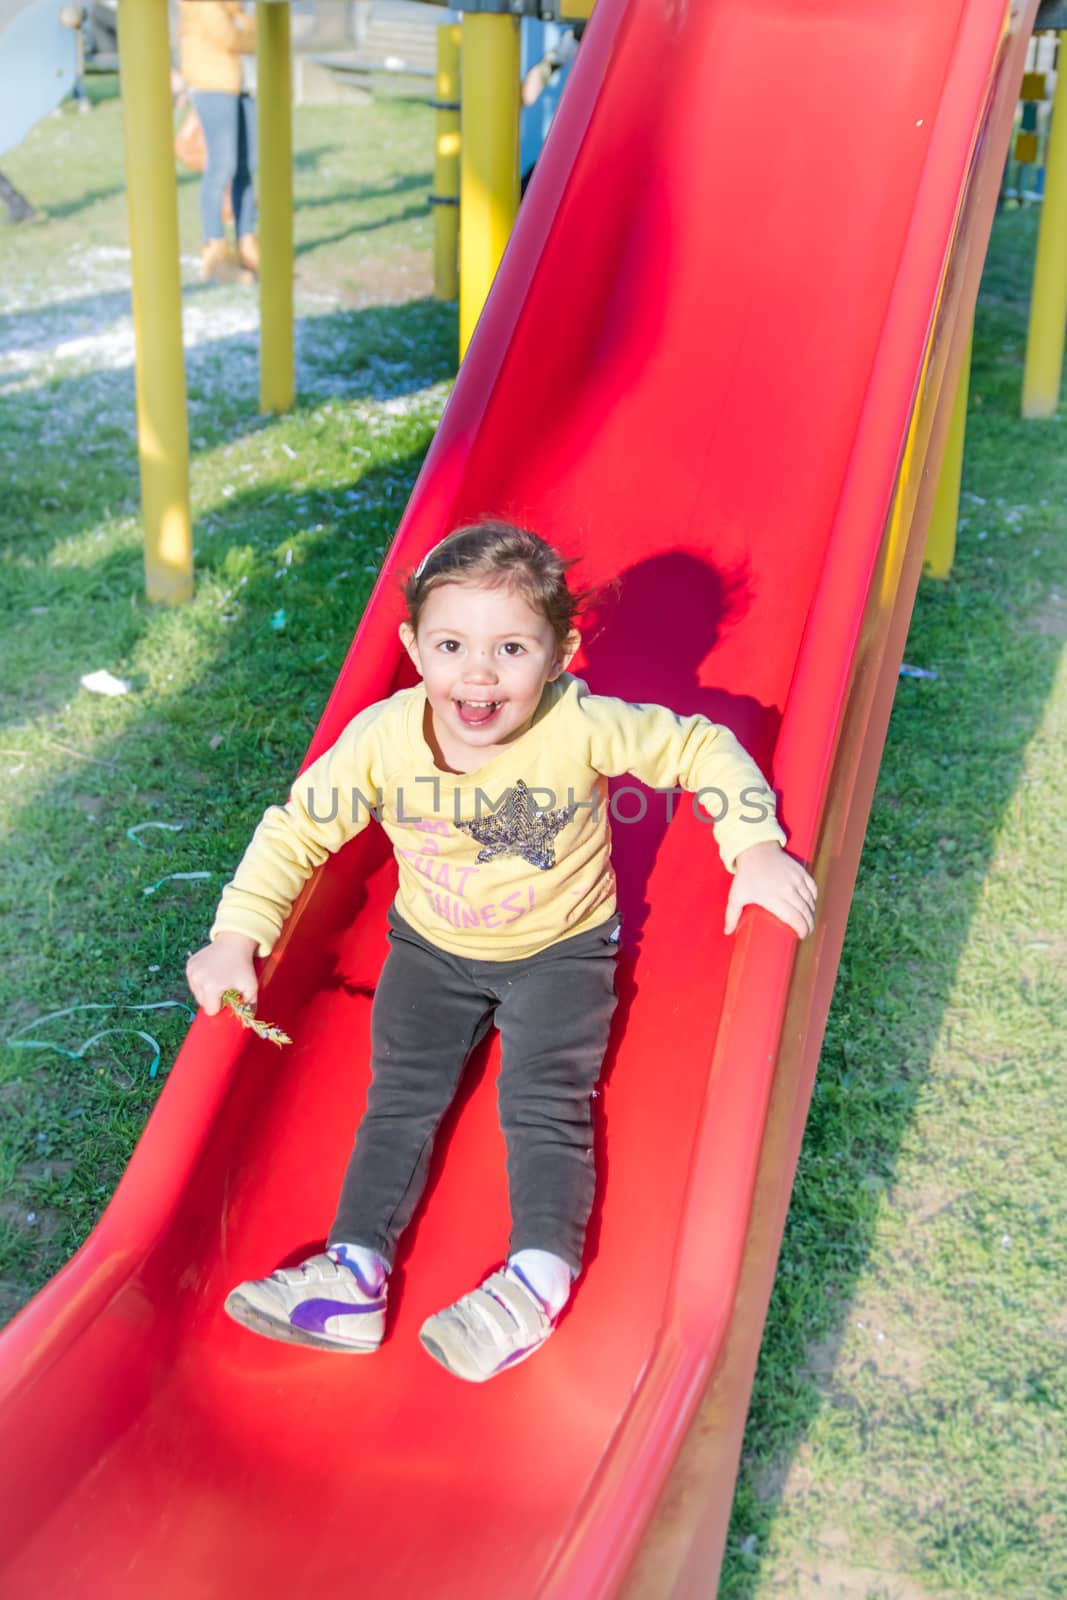 child falls from the red slide in a playground